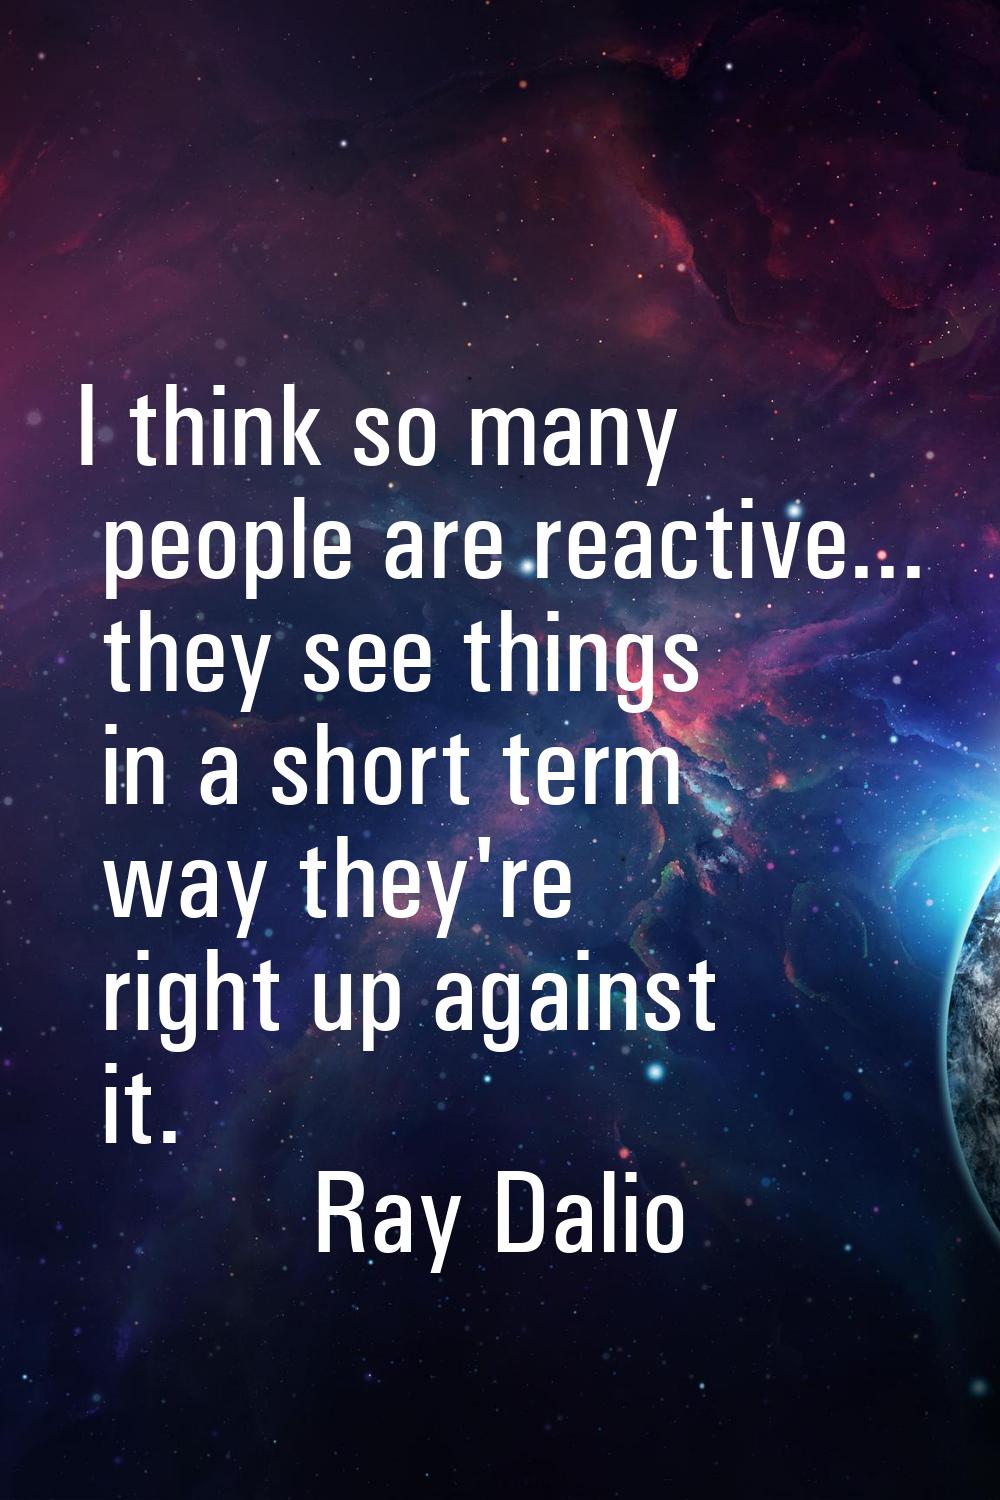 I think so many people are reactive... they see things in a short term way they're right up against